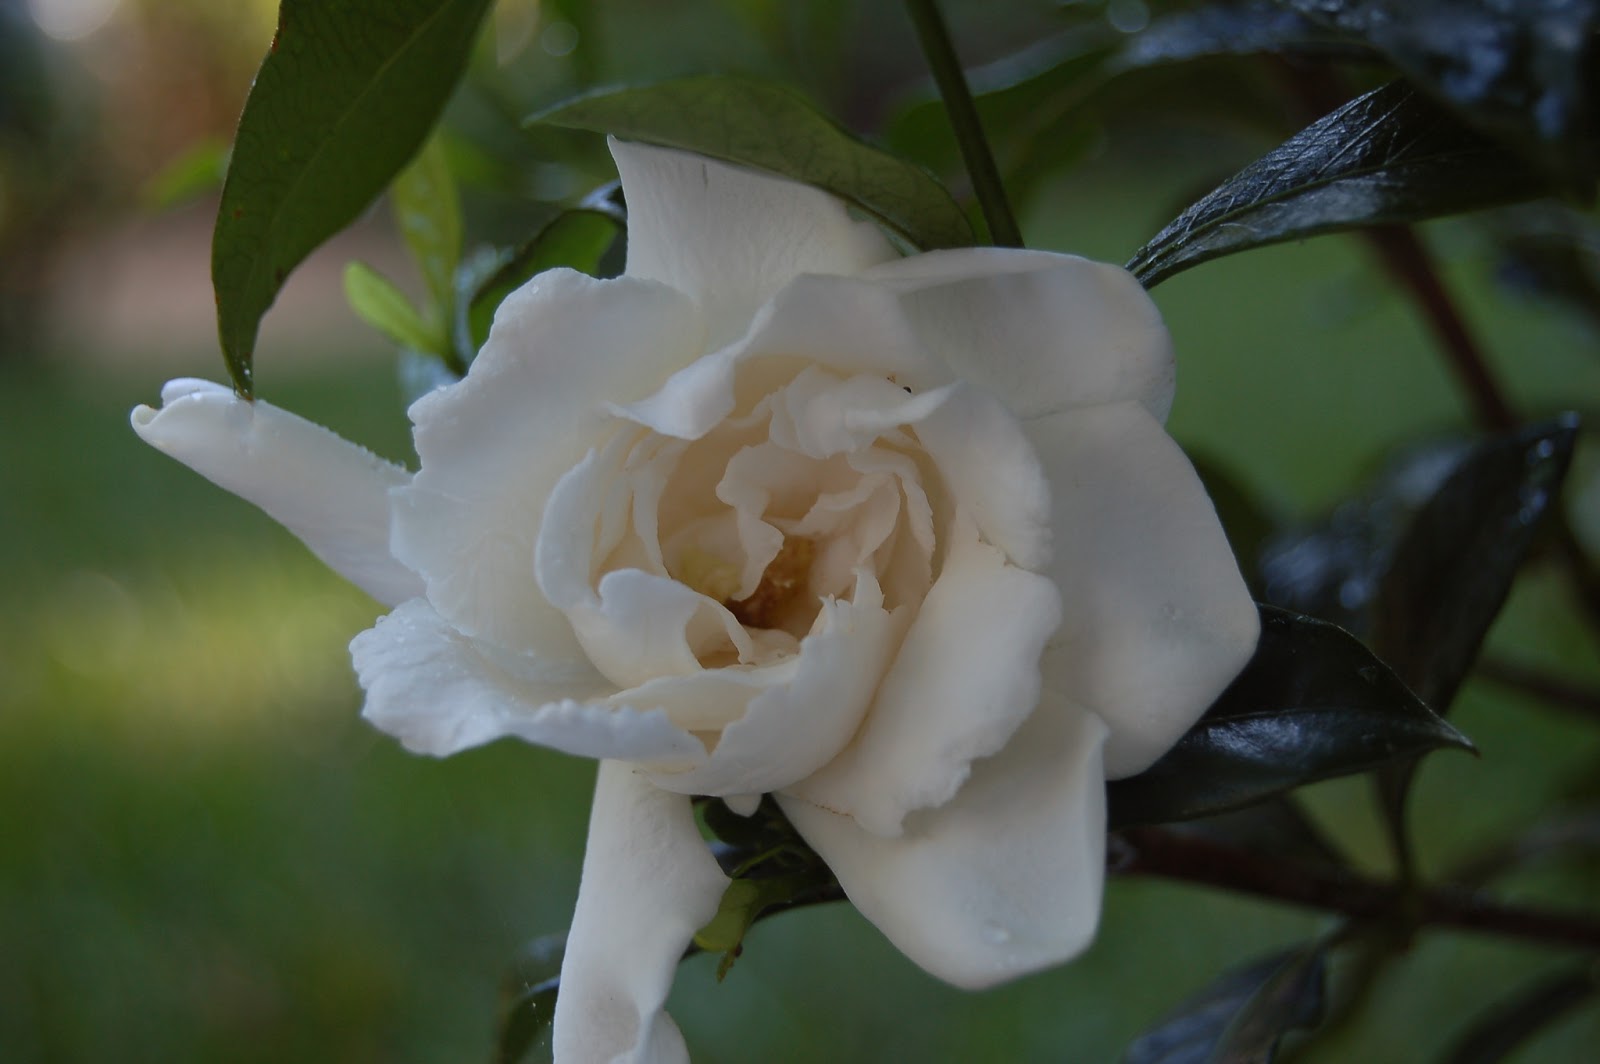 The Perfect Gardenia Candle - The Search is On